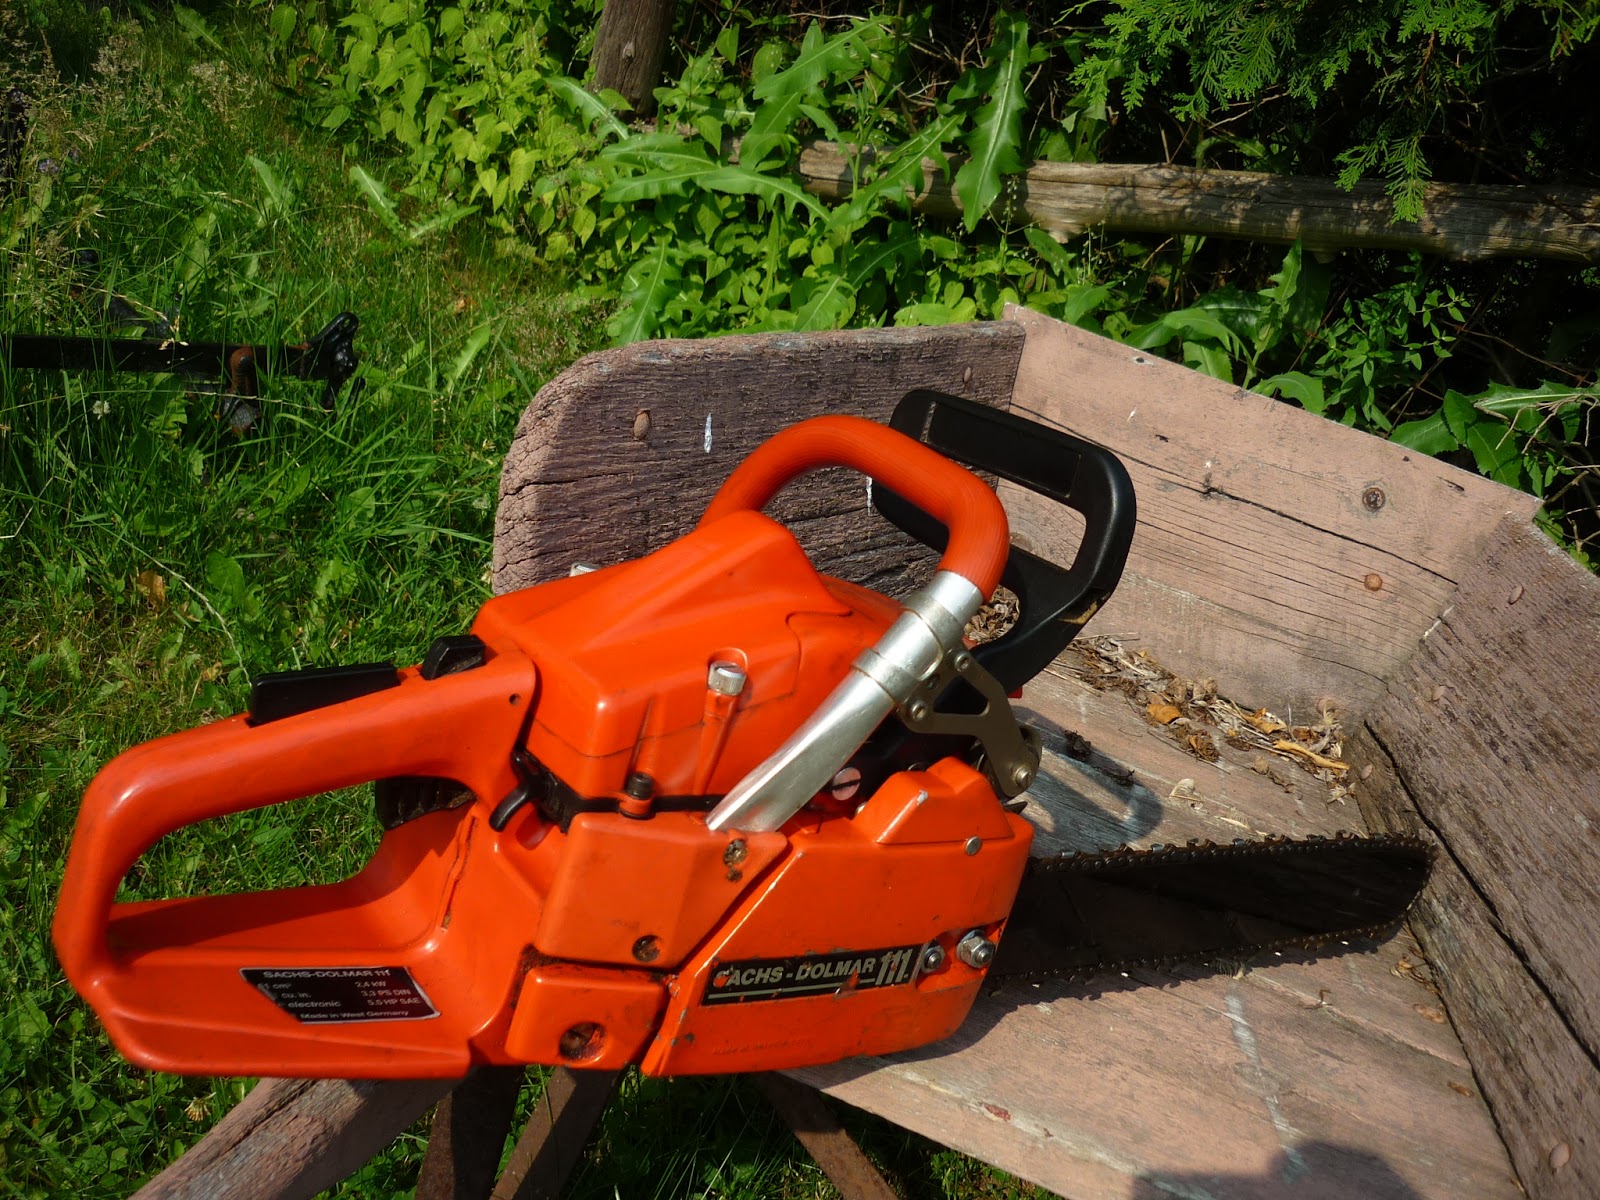 VINTAGE CHAINSAW COLLECTION DOLMAR 111 (EARLY 1987 VERSION)